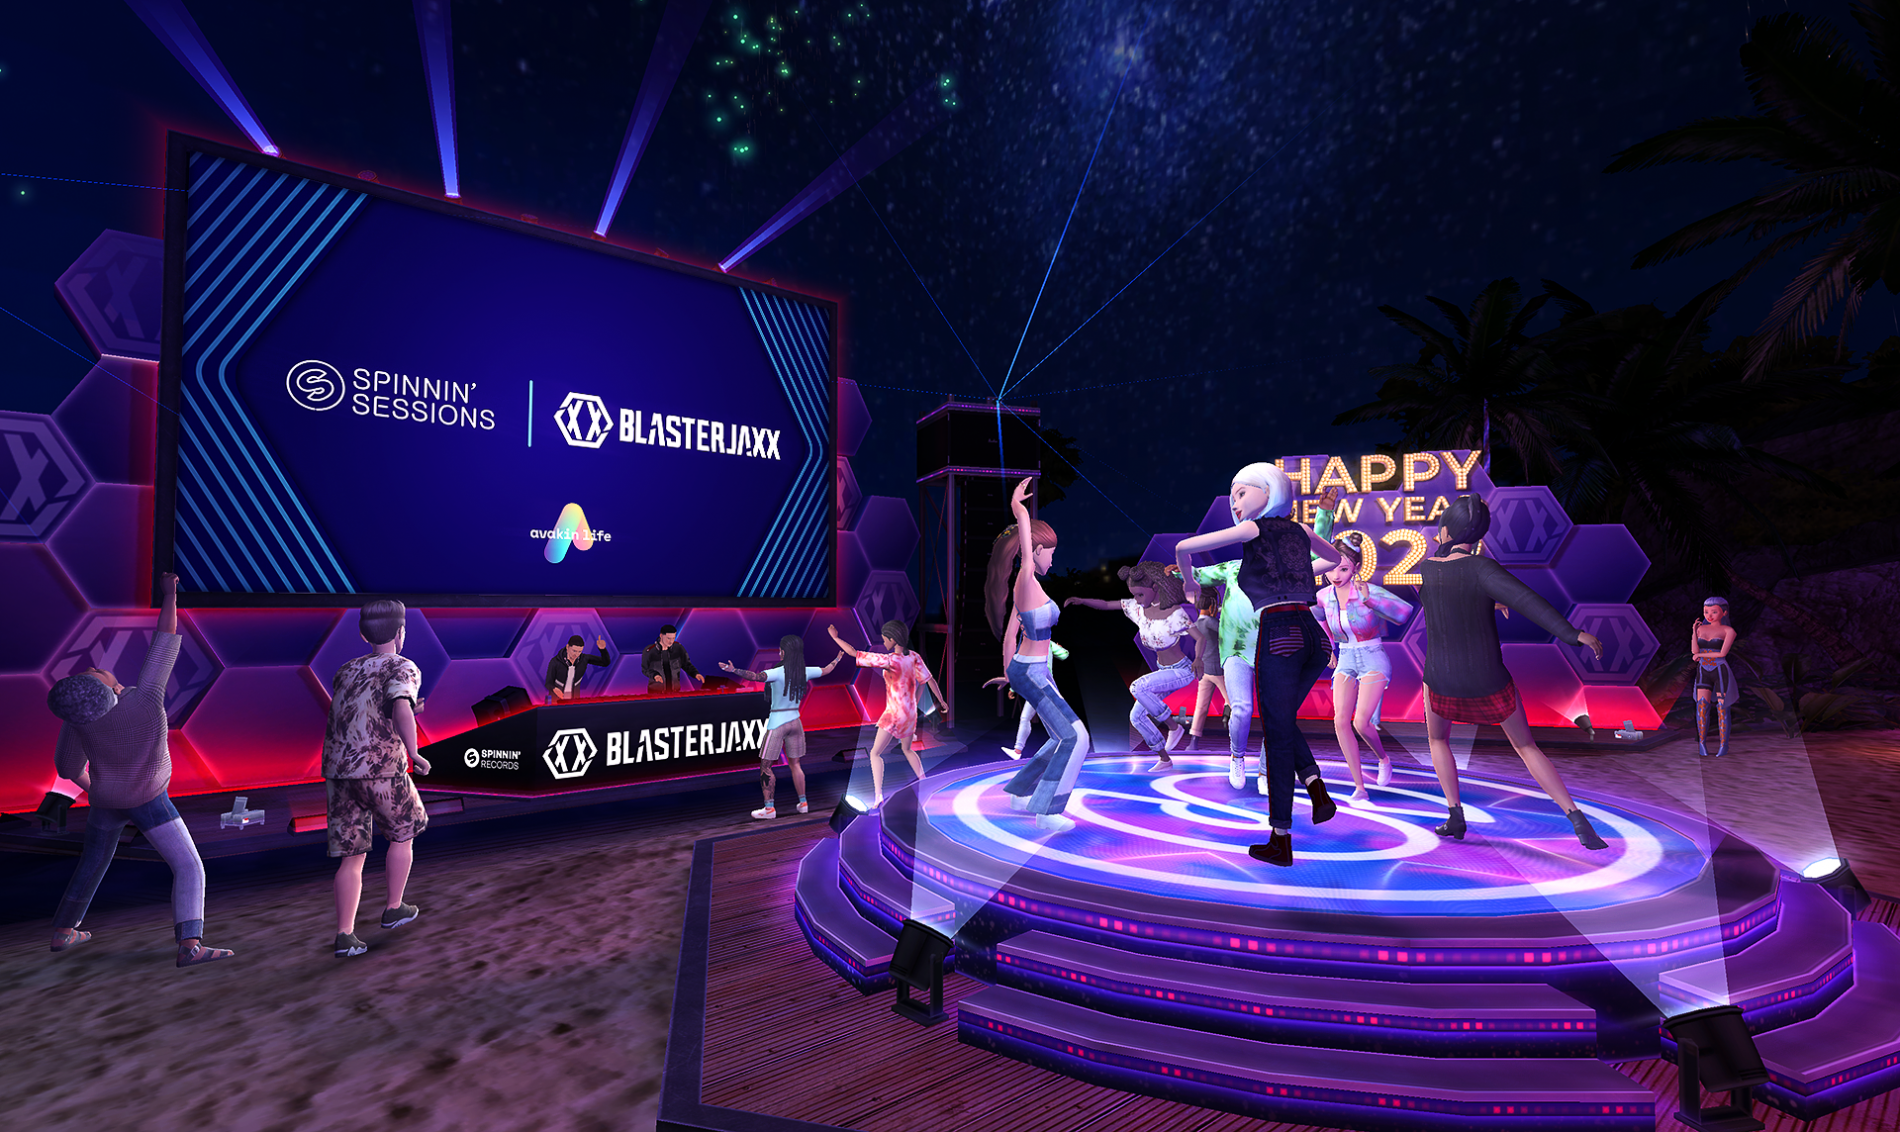 Avakin Life and Blasterjaxx hosted an epic New Year’s Eve party to start 2022!